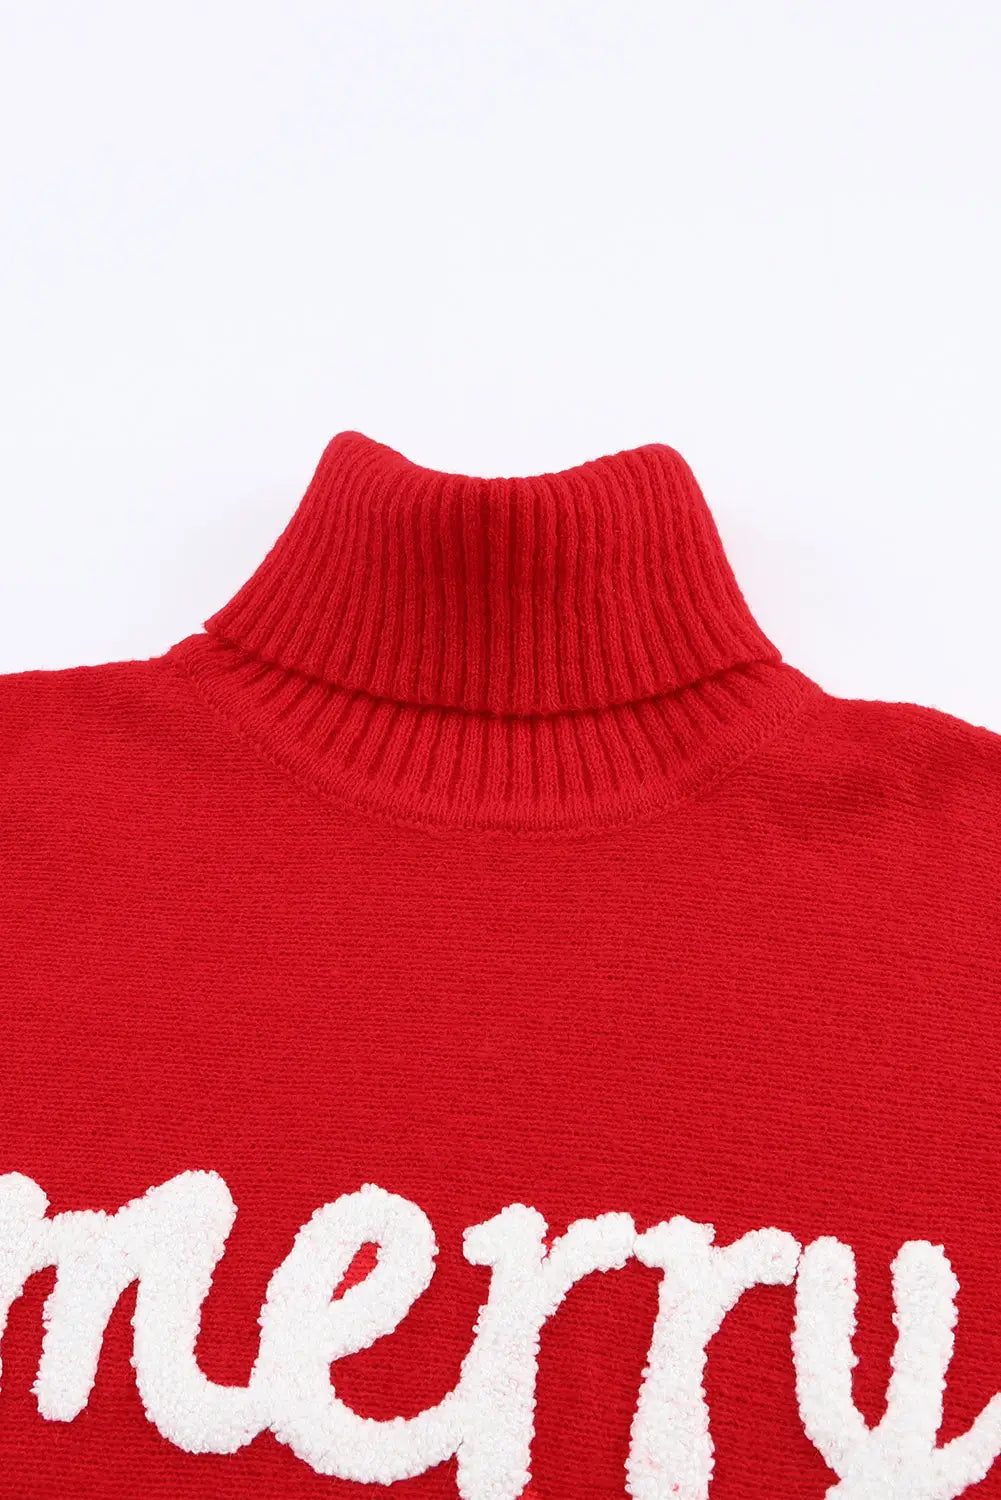 Racing red valentine love letter embroidered high neck sweater - tops